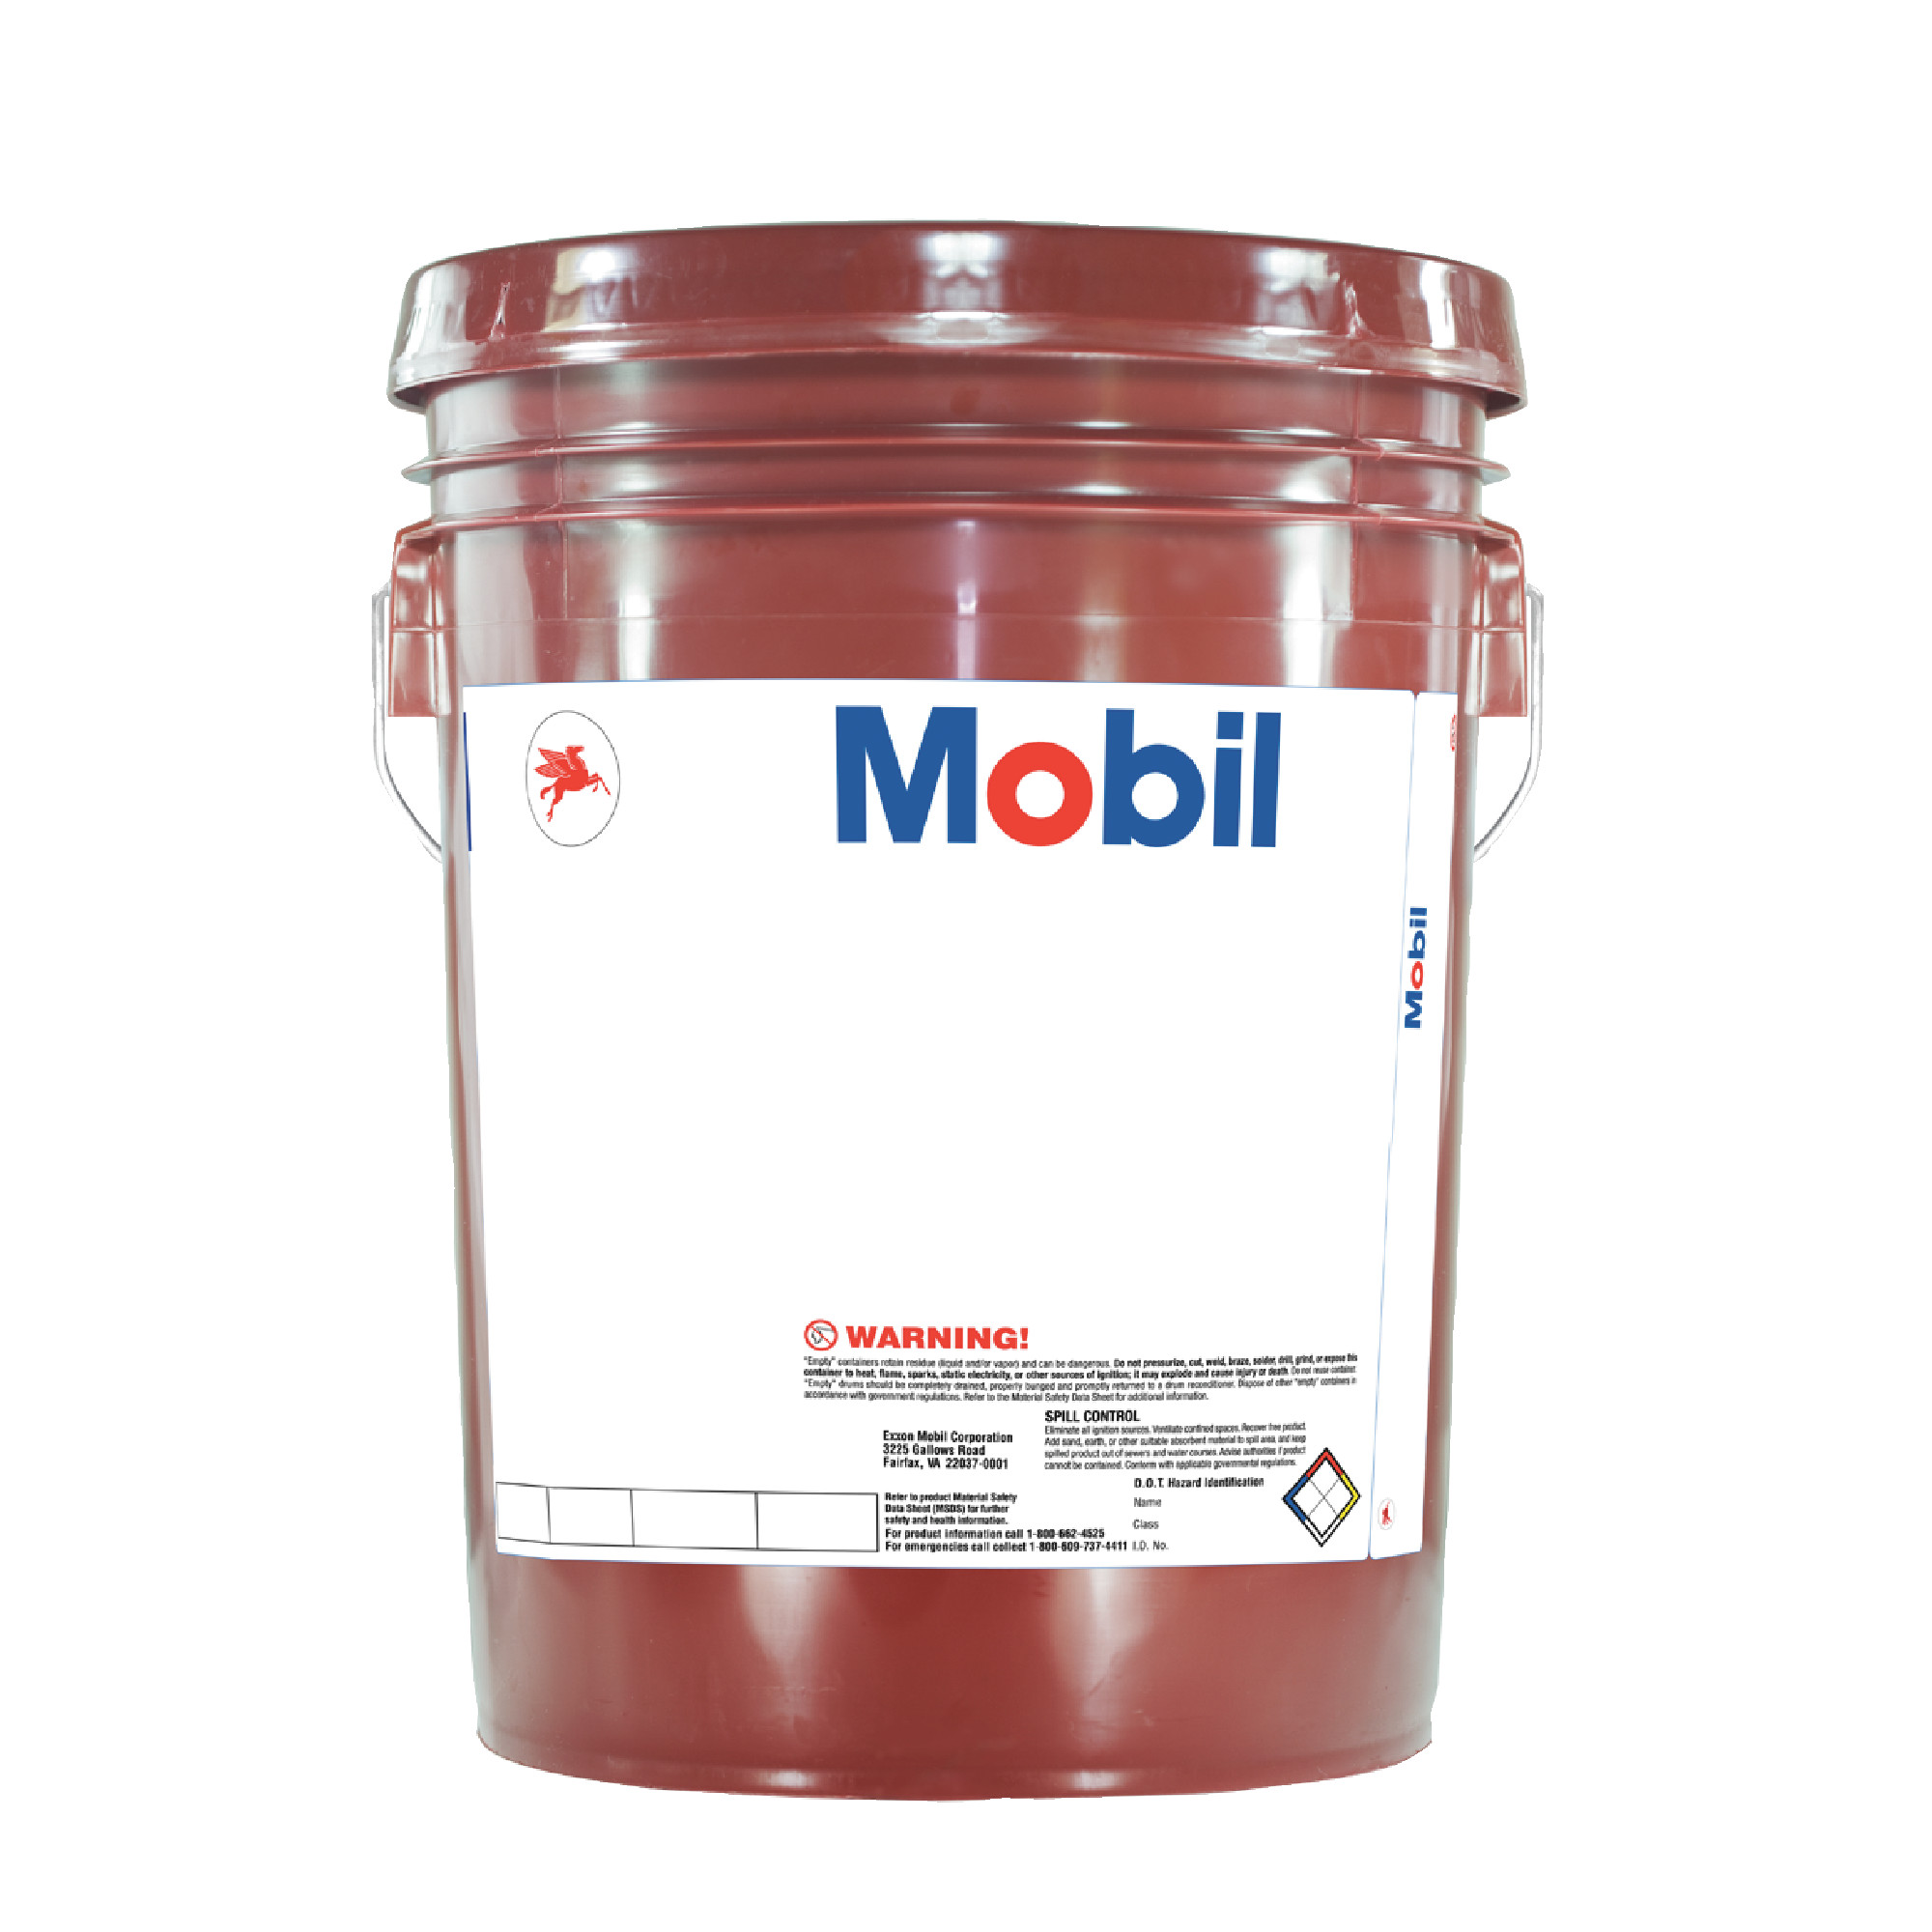 MOBIL VELOCITE #3 5 Gallon Pail High Speed Spindle and Hydraulic Oils